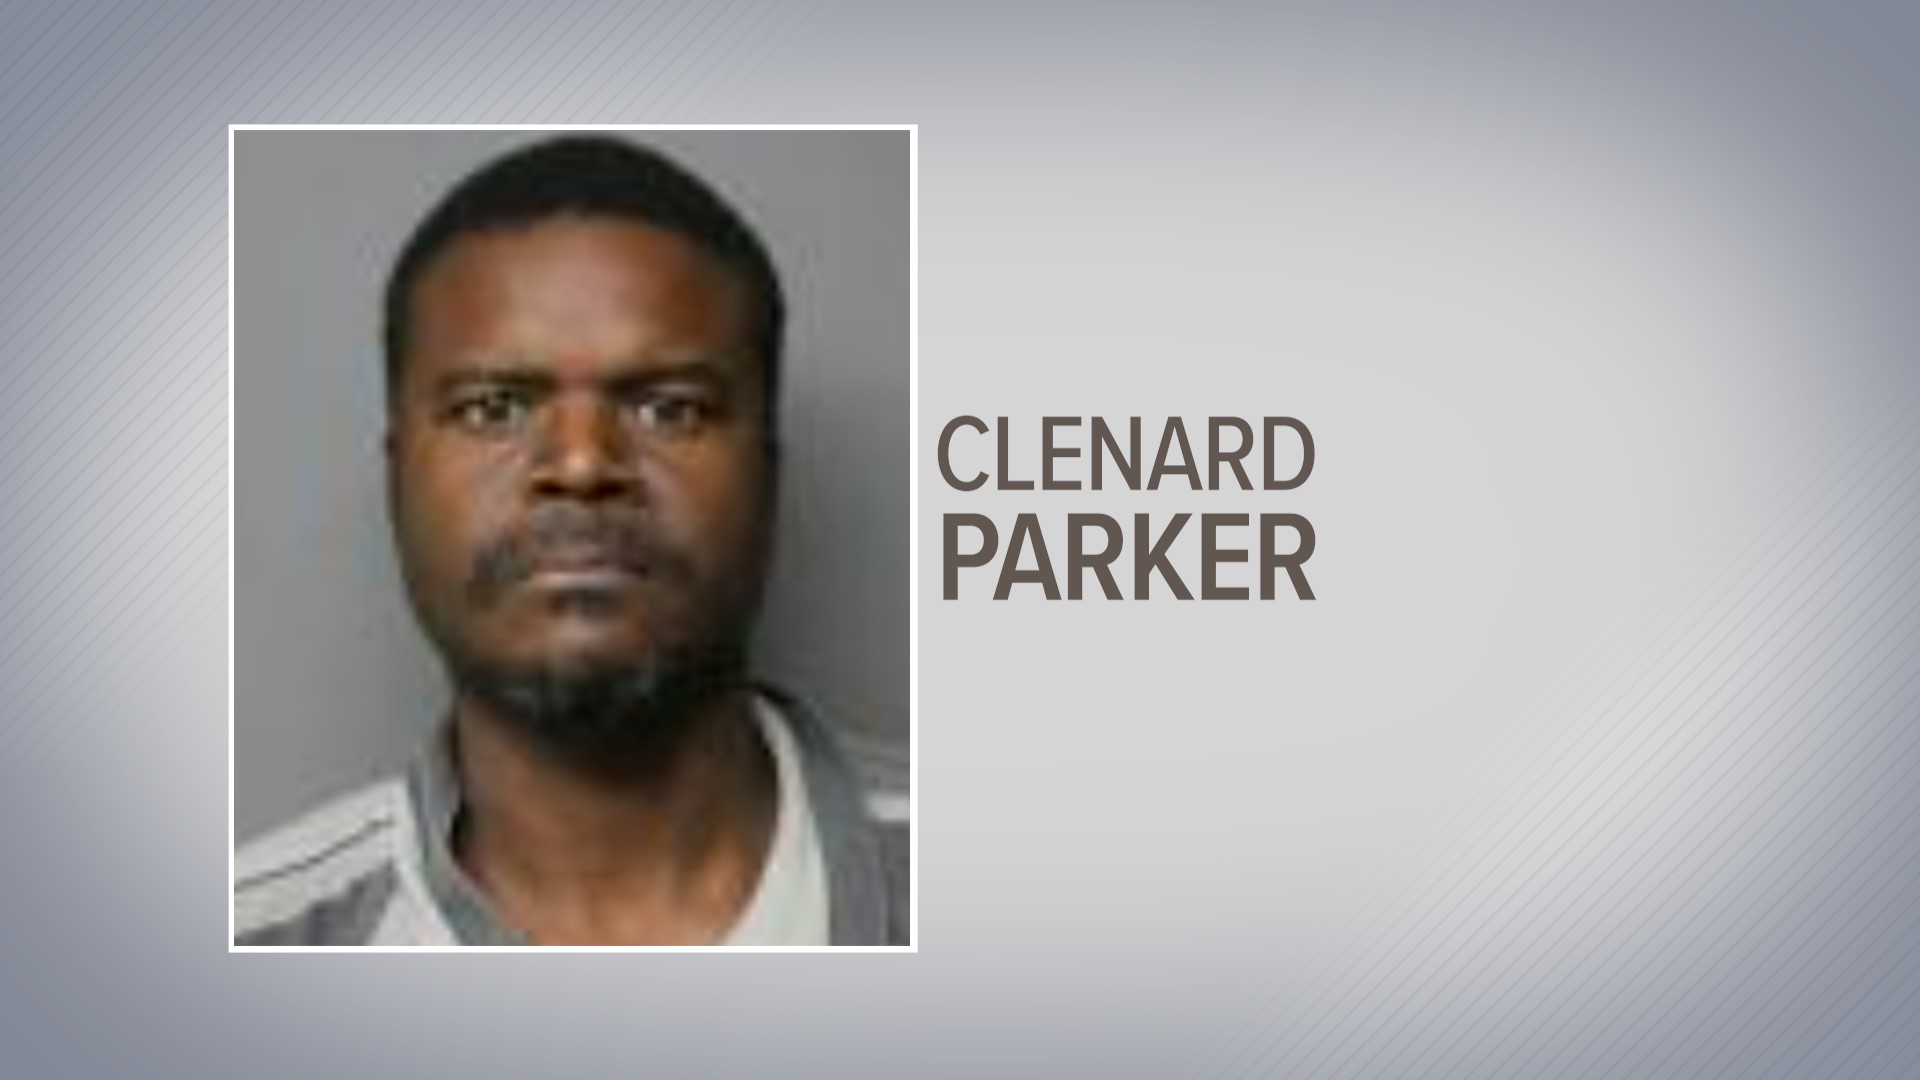 Clenard Parker was taken into custody by the Washington County Sheriff's Office after reportedly slamming a big rig into a Brenham DPS office.